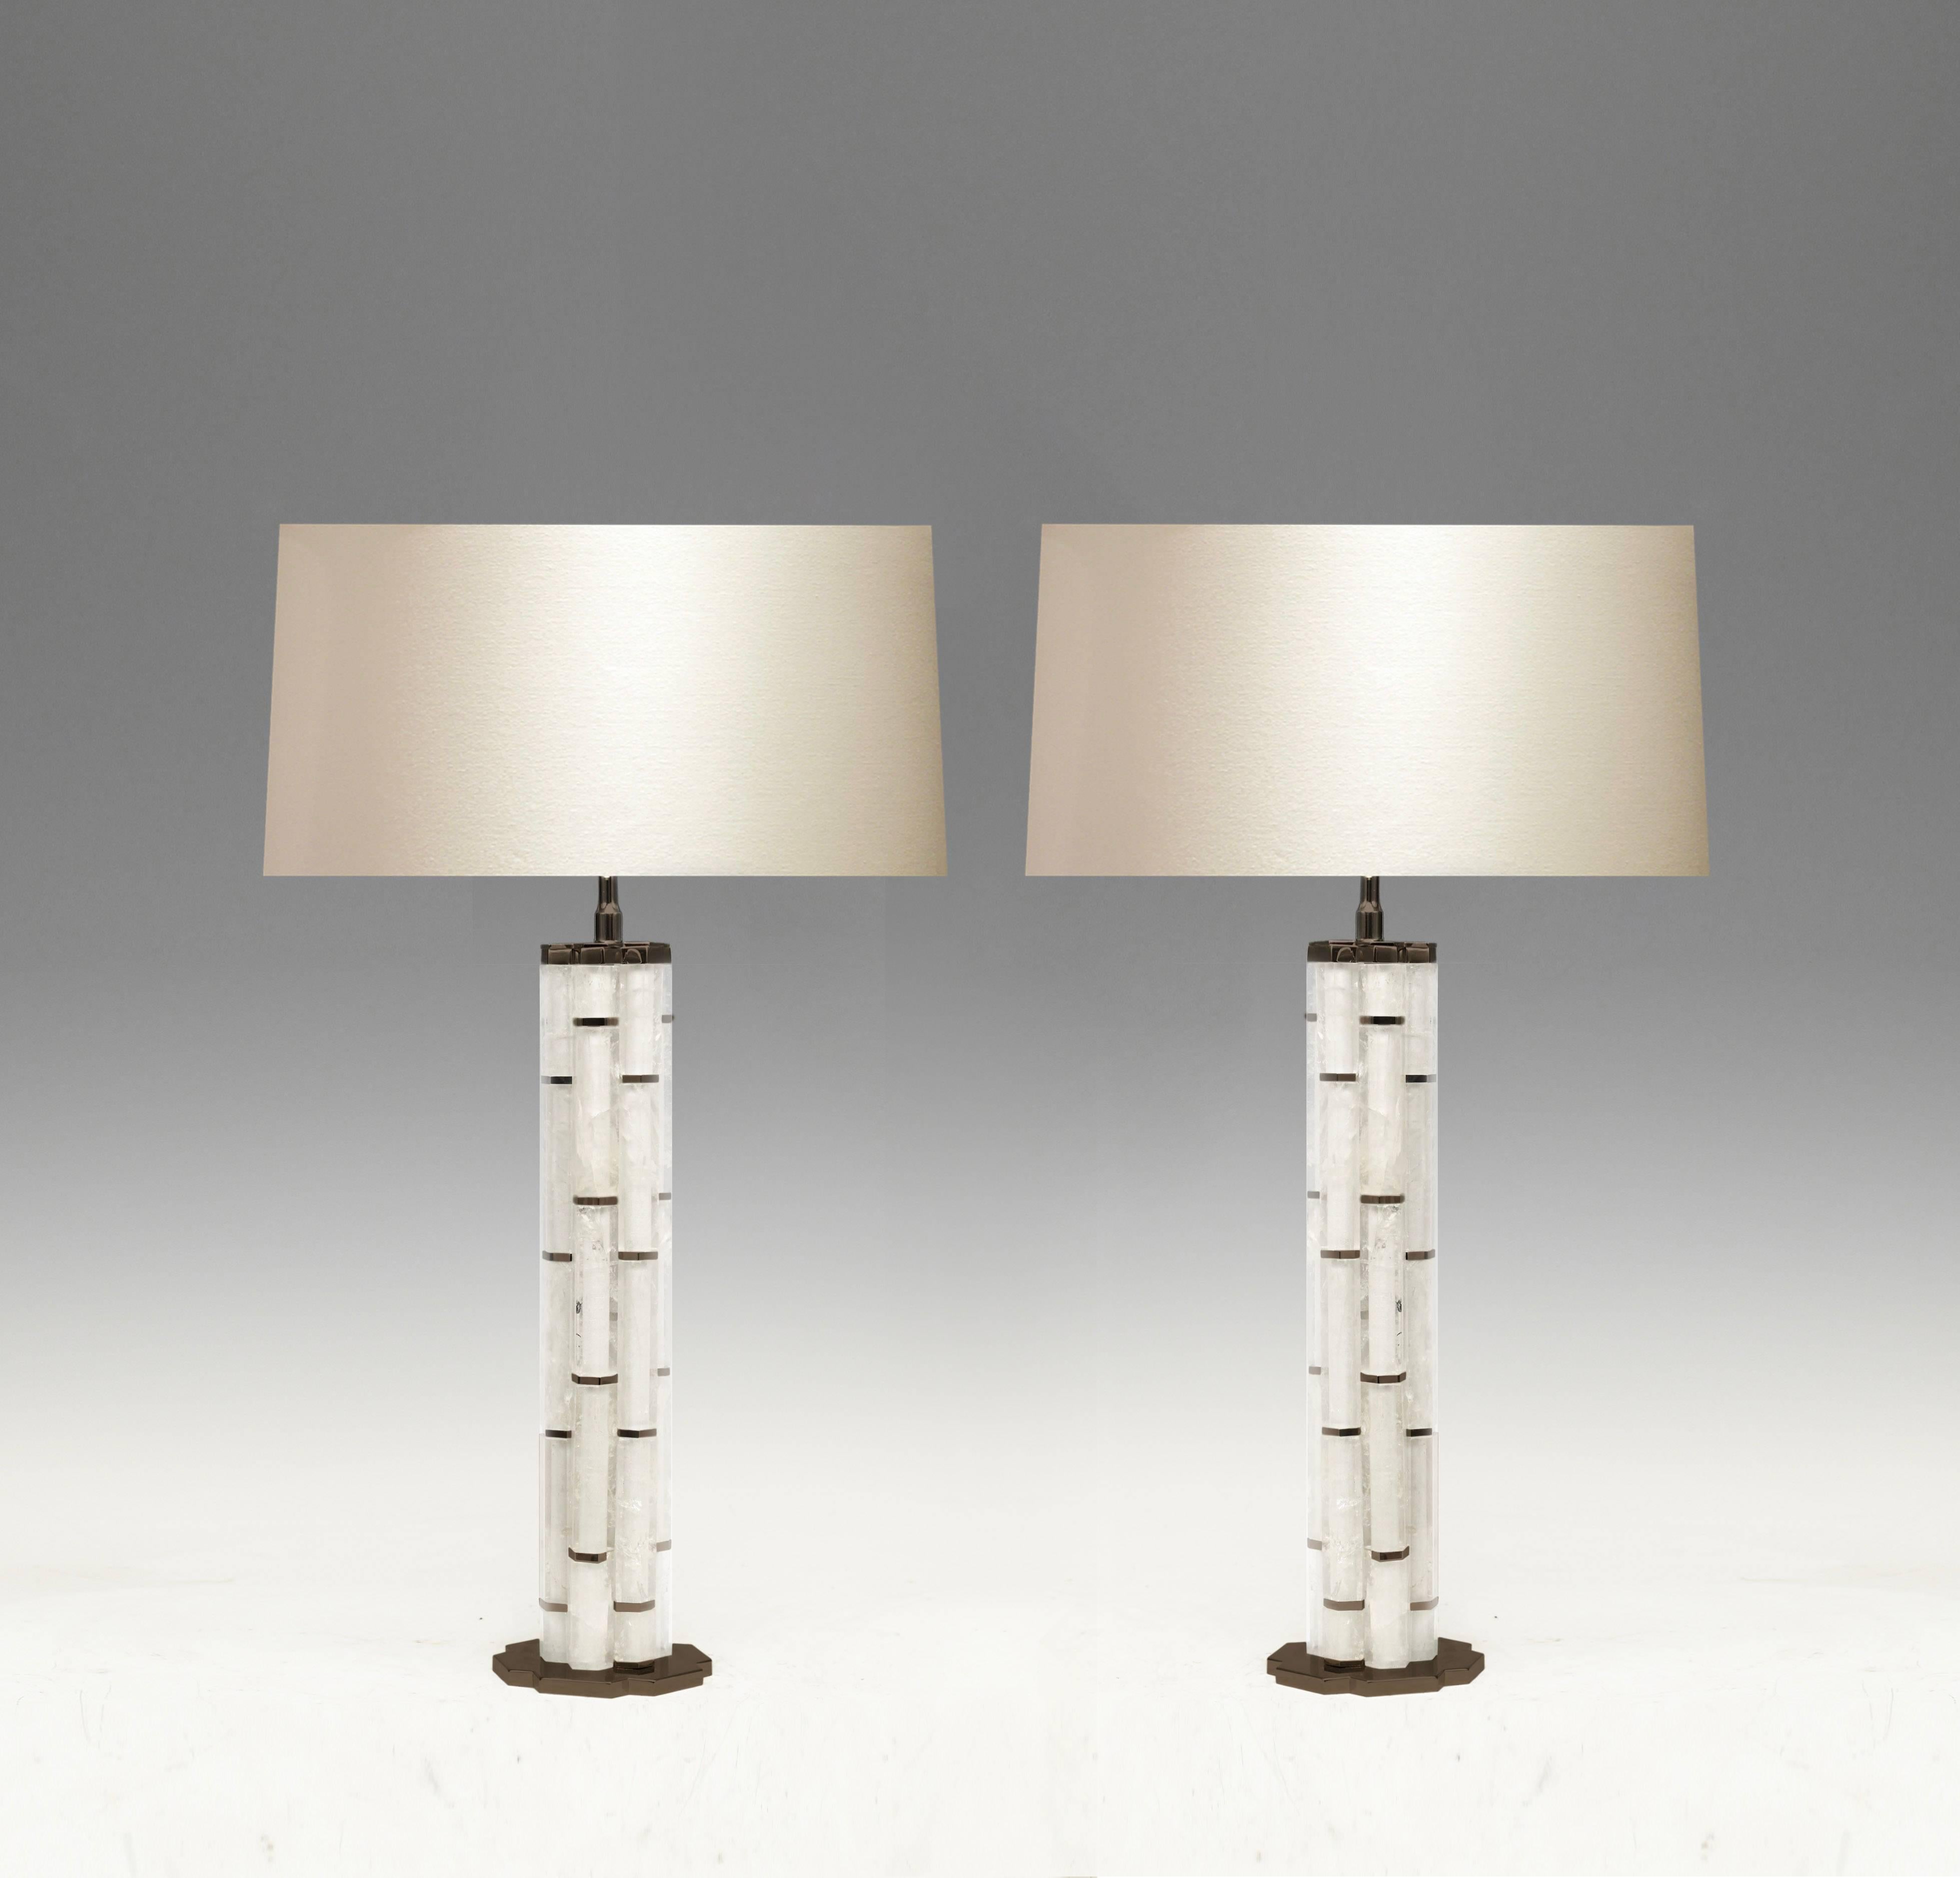 A pair of bamboo-inspired rock crystal quartz Lamps with antique bases and decorations. Created by Phoenix Gallery NYC.
17.5H to the top of rock crystal.
